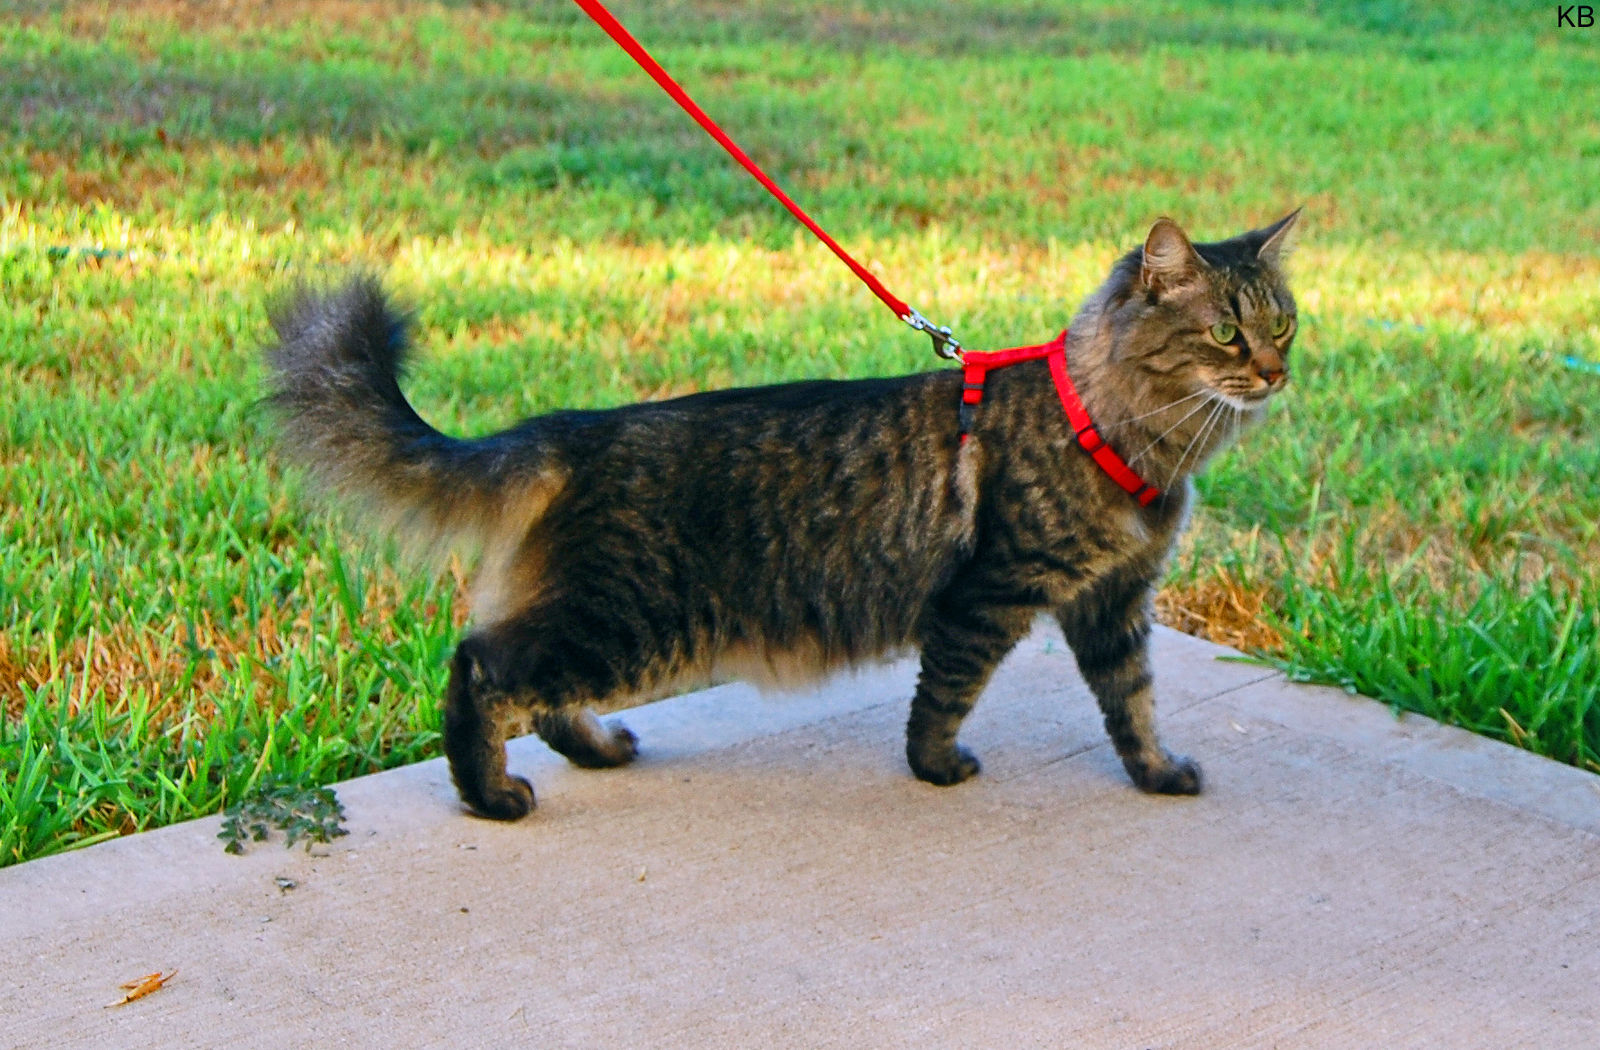 Can You Walk Your Cat on a Leash?